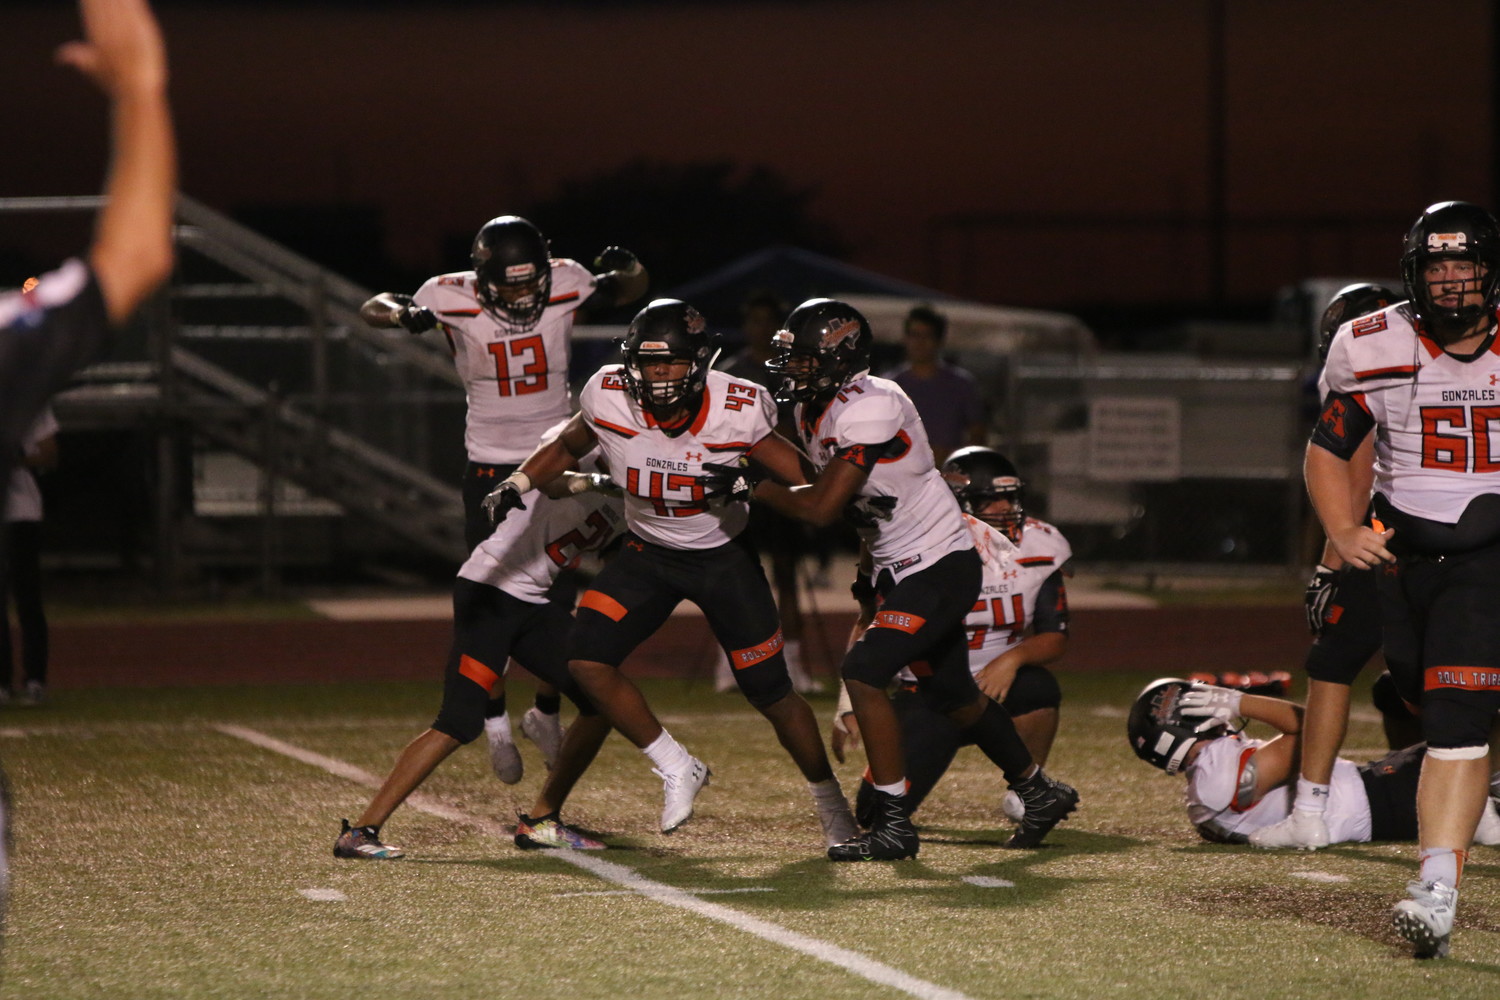 The Apaches defense celebrates a big play on the field.